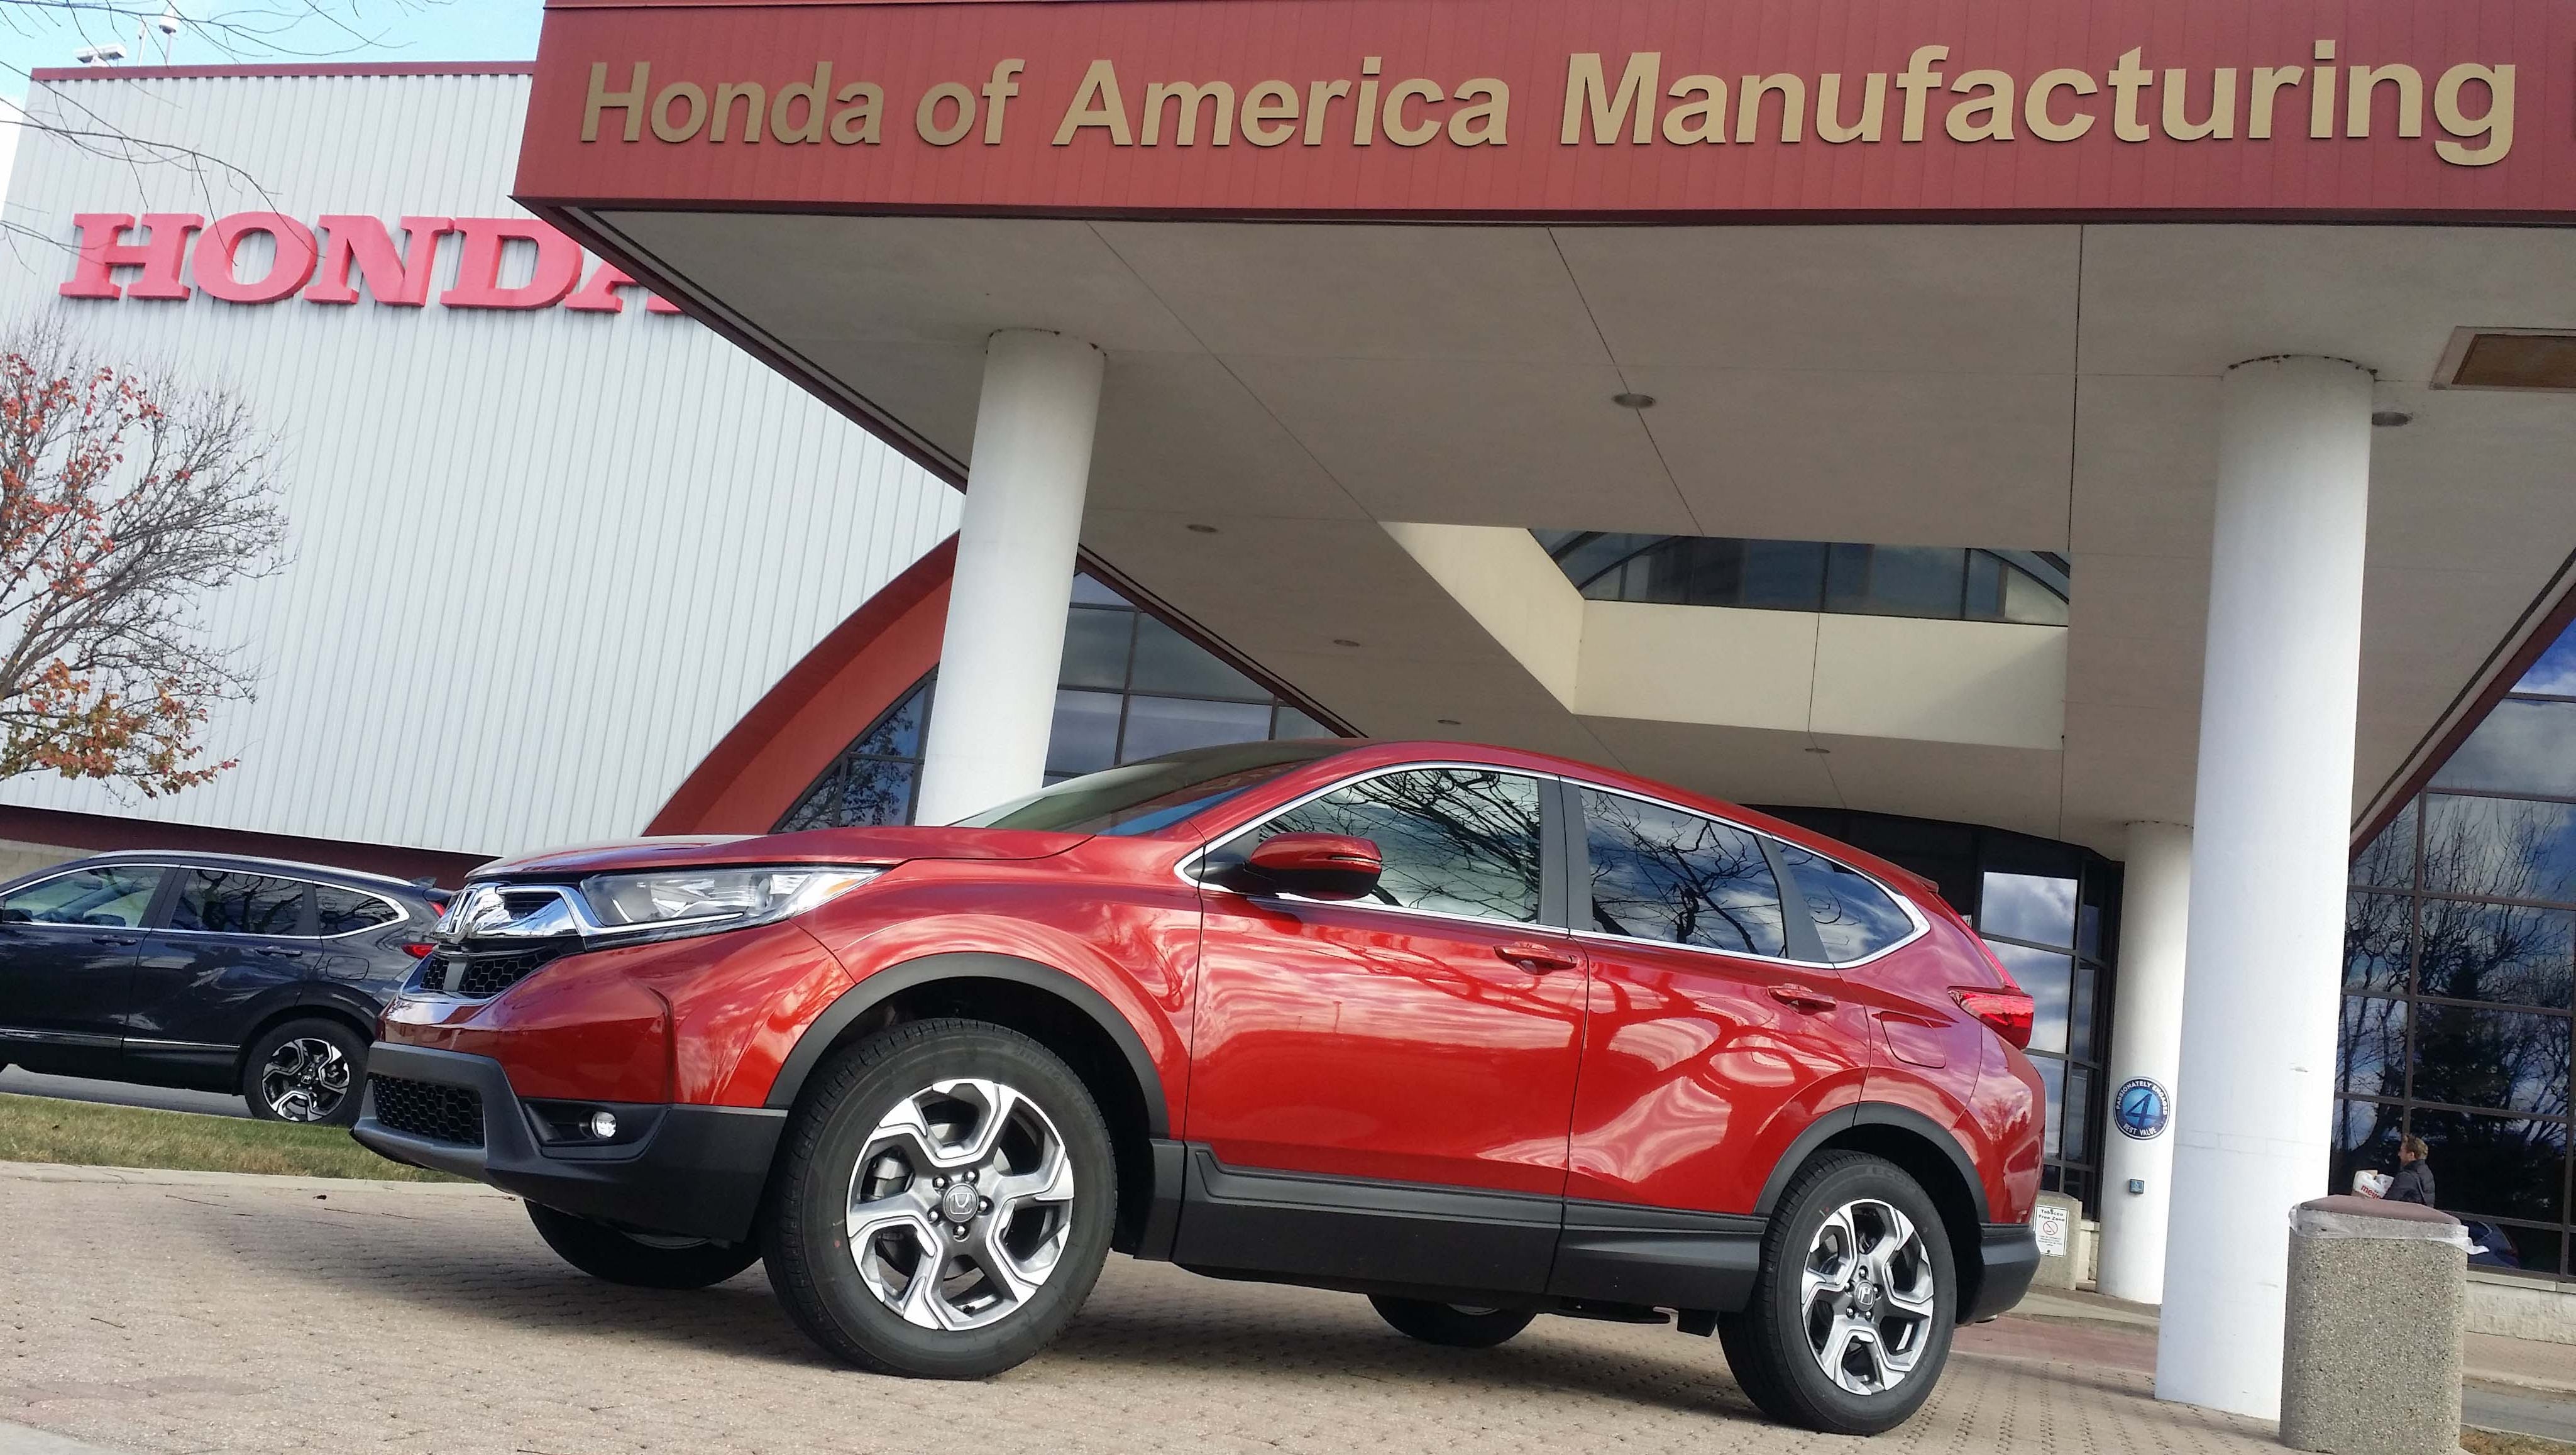 The 2017 Honda CR-V is produced at Ohio's East Liberty plant alongside the Acura RDX. The new, more flexible plant can also produce the Honda Civic and Acura MDX.